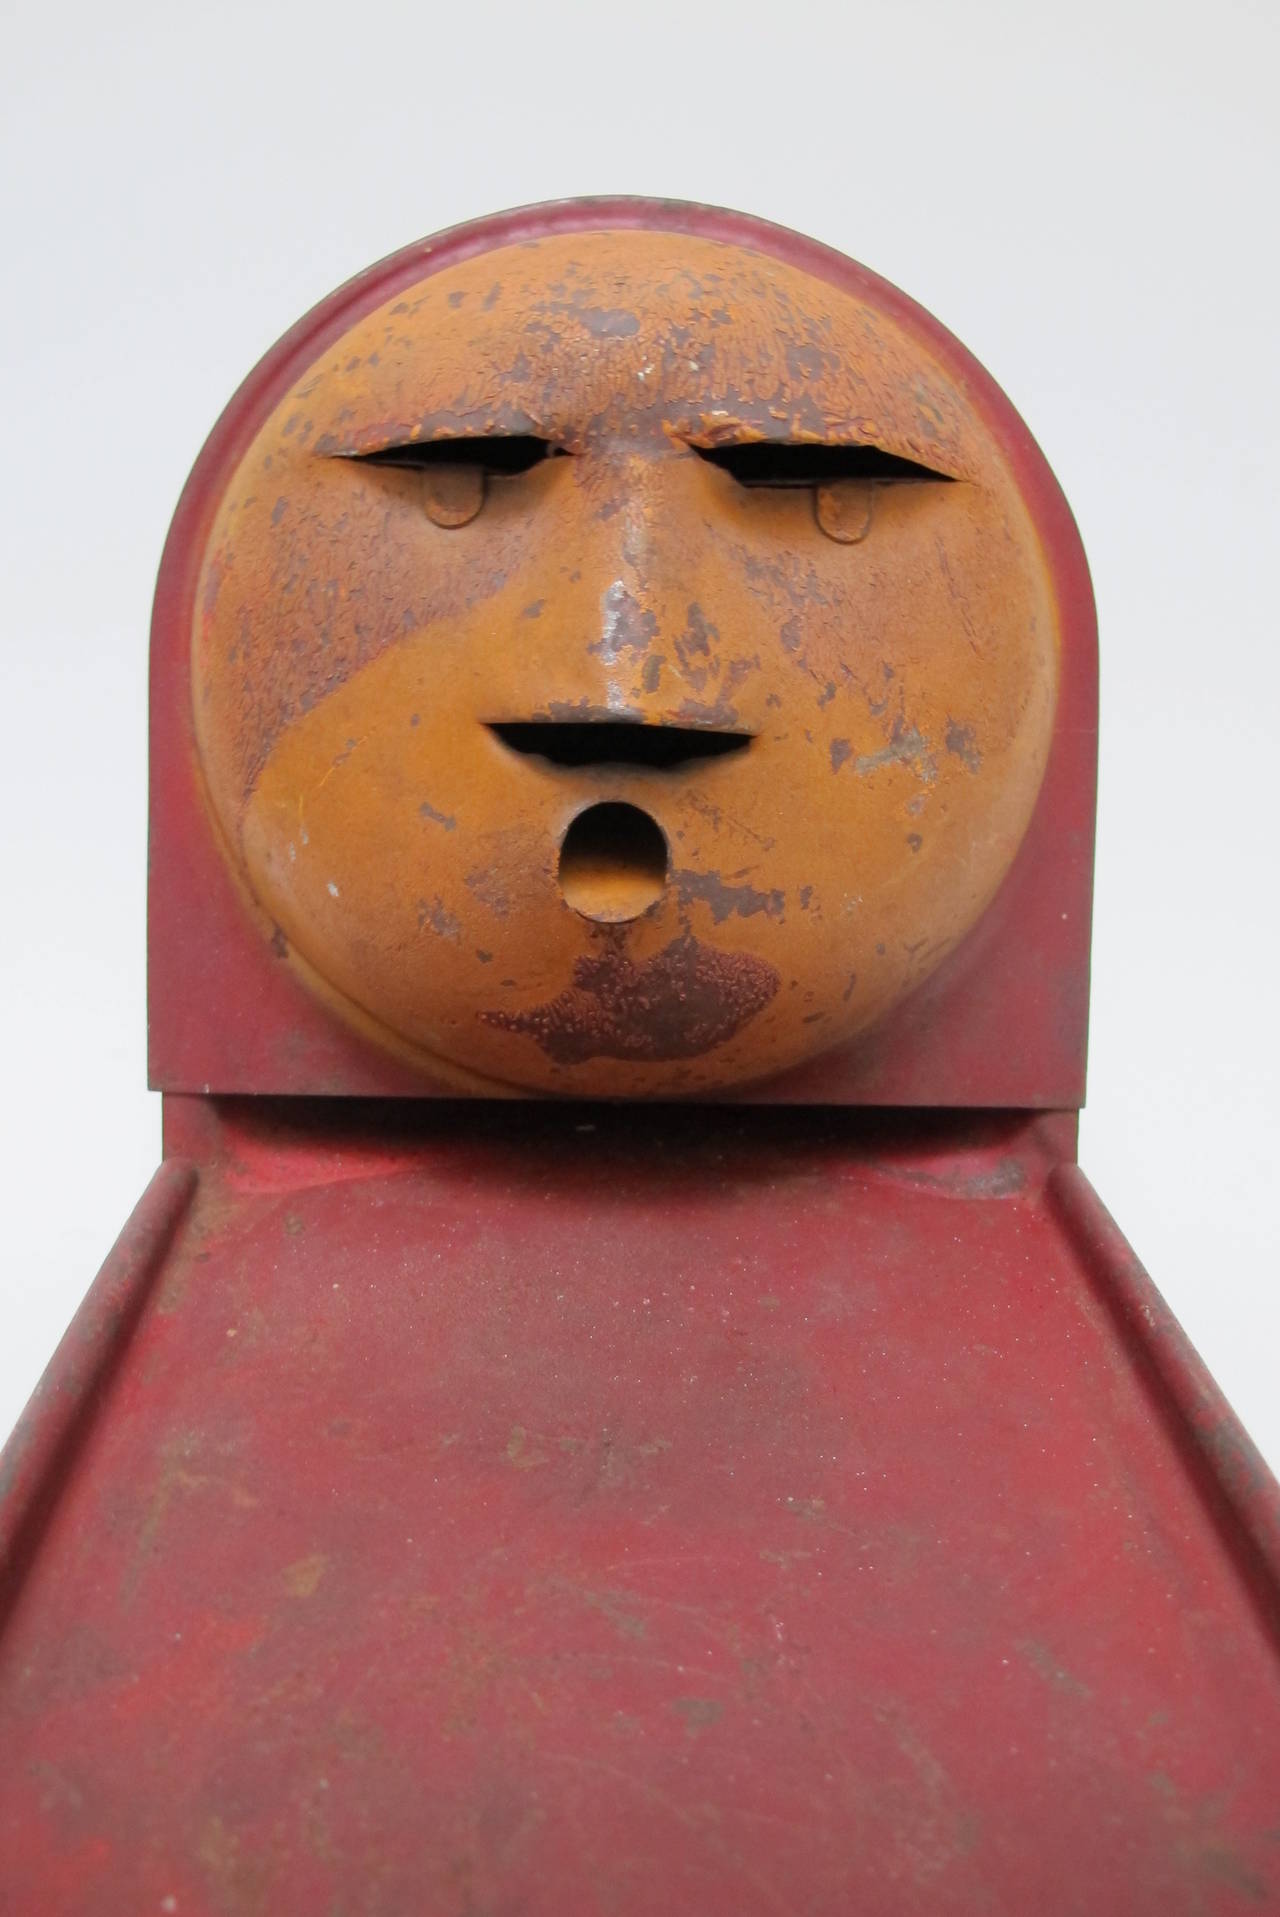 The moon face is the target for the shooter of metal balls. The ball goes under the moon and up the curved back and fall through the holes in the eyes, nose or mouth. There is the remains of an old maker's label which is unreadable.